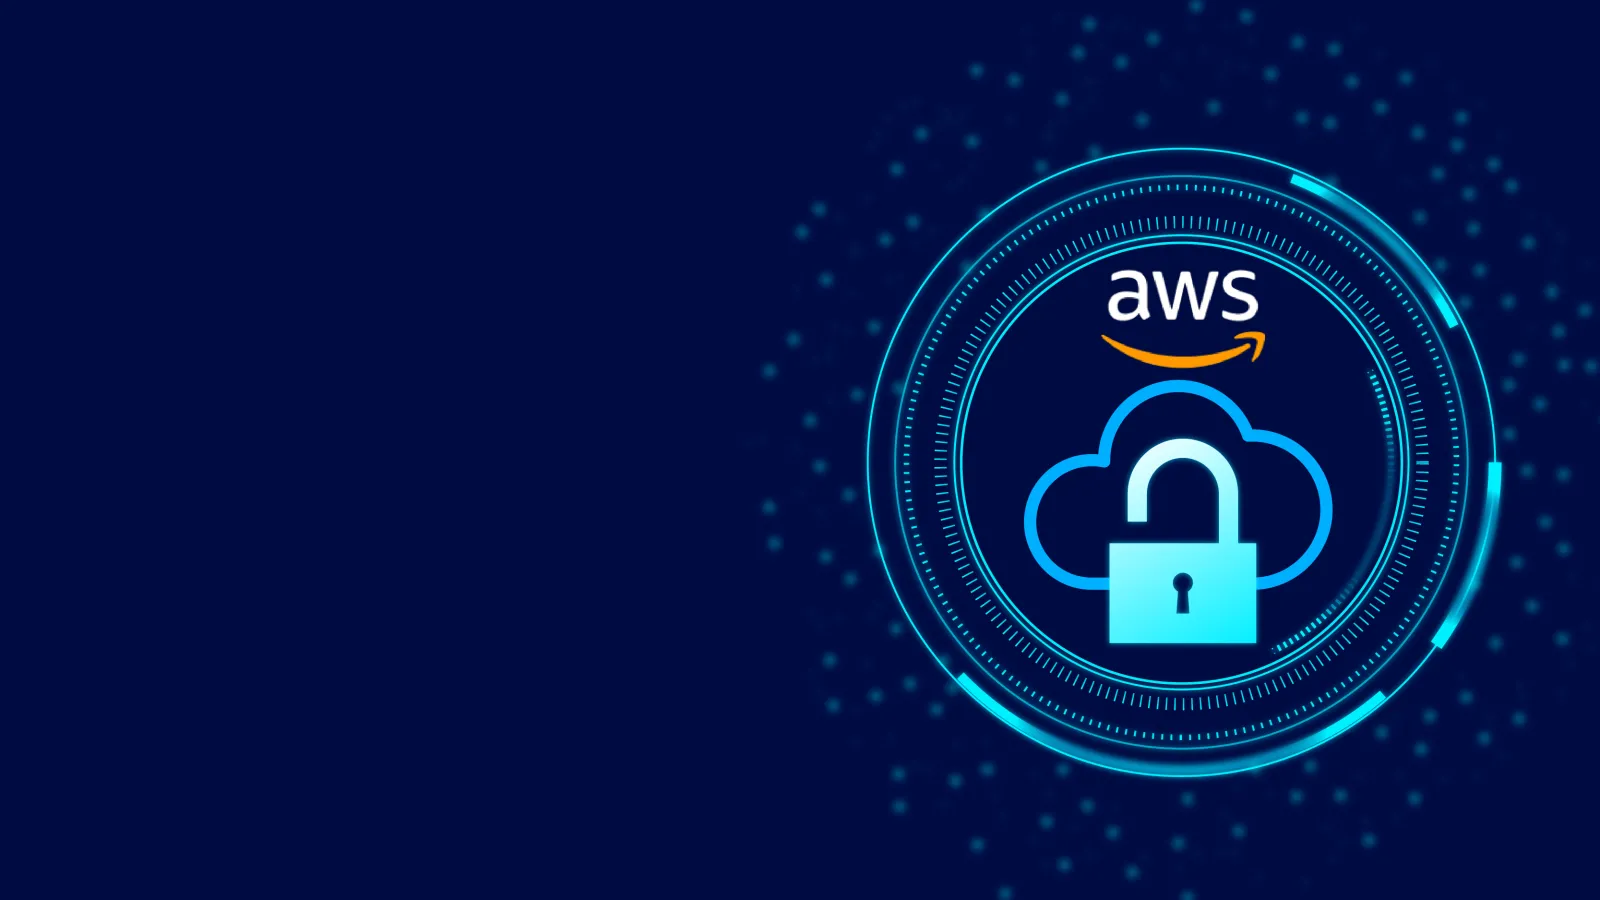 Transform your business with AWS